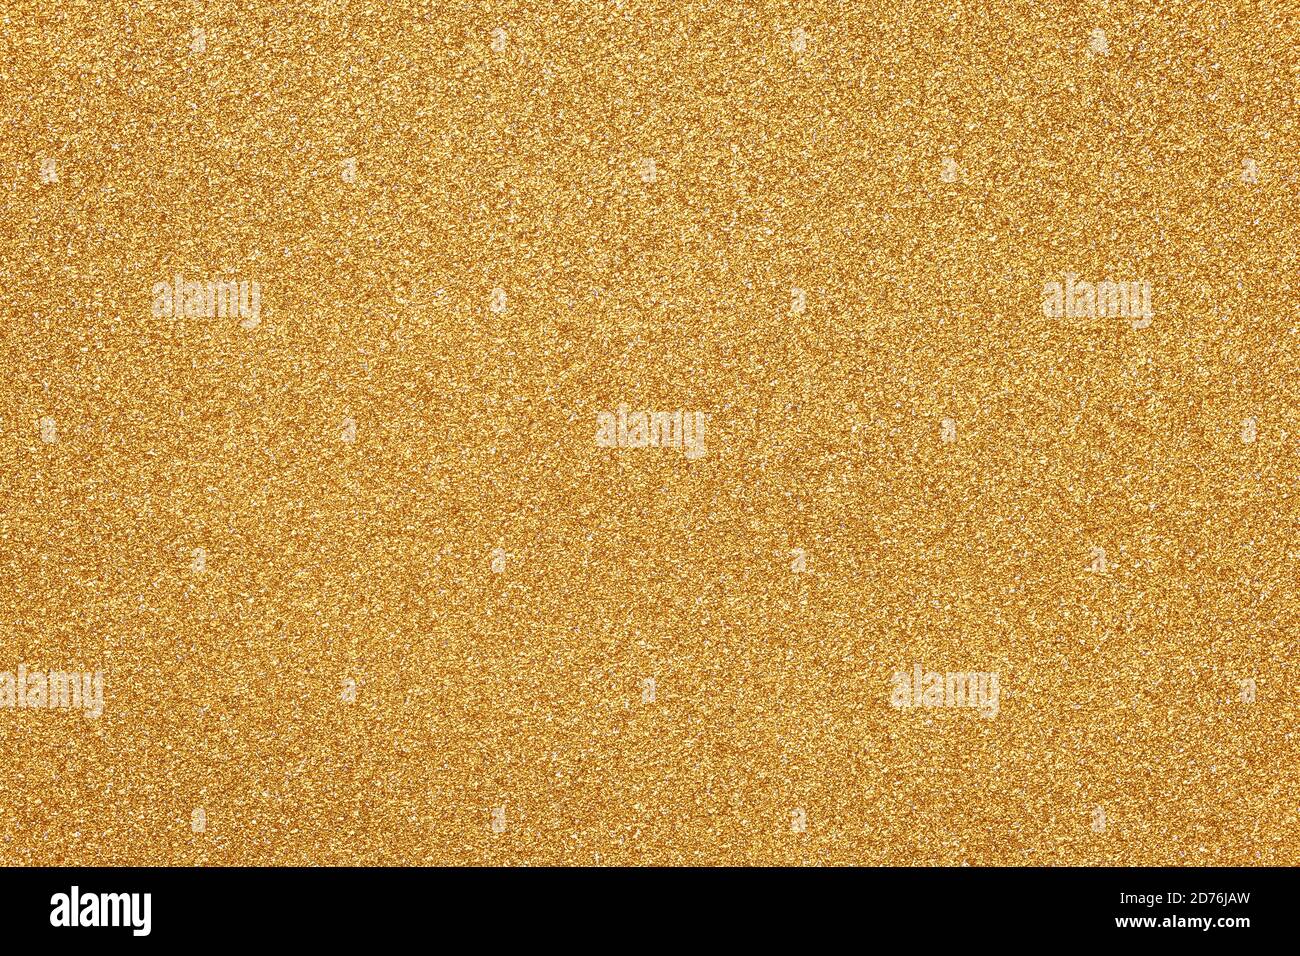 Gold sparkle texture, Christmas paper background. Glitter surface. Abstract grain pattern. Festive decoration. Shiny fabric with sequins. Holiday art Stock Photo